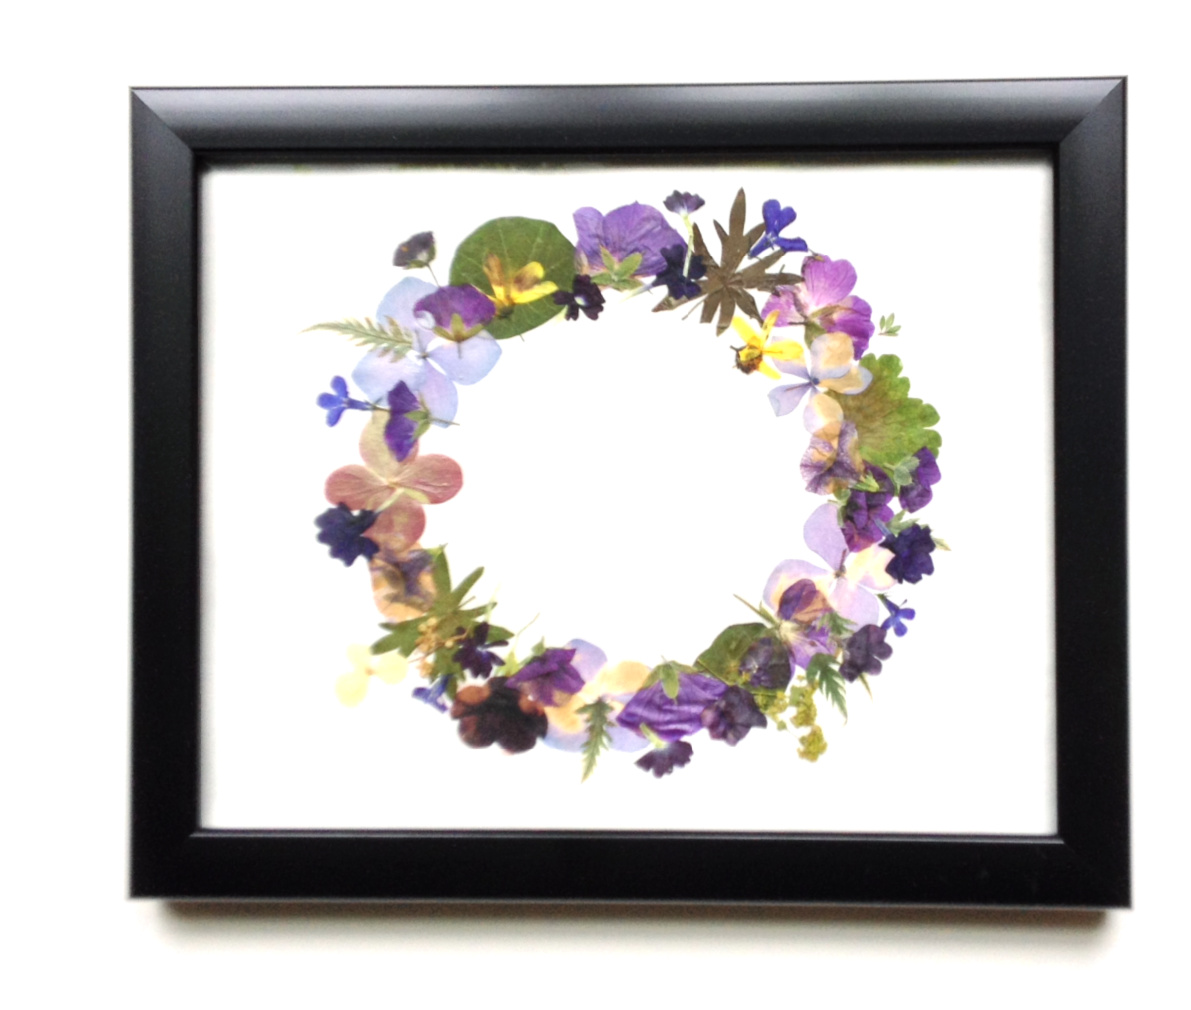 Pressed flowers into a wreath shape and framed.